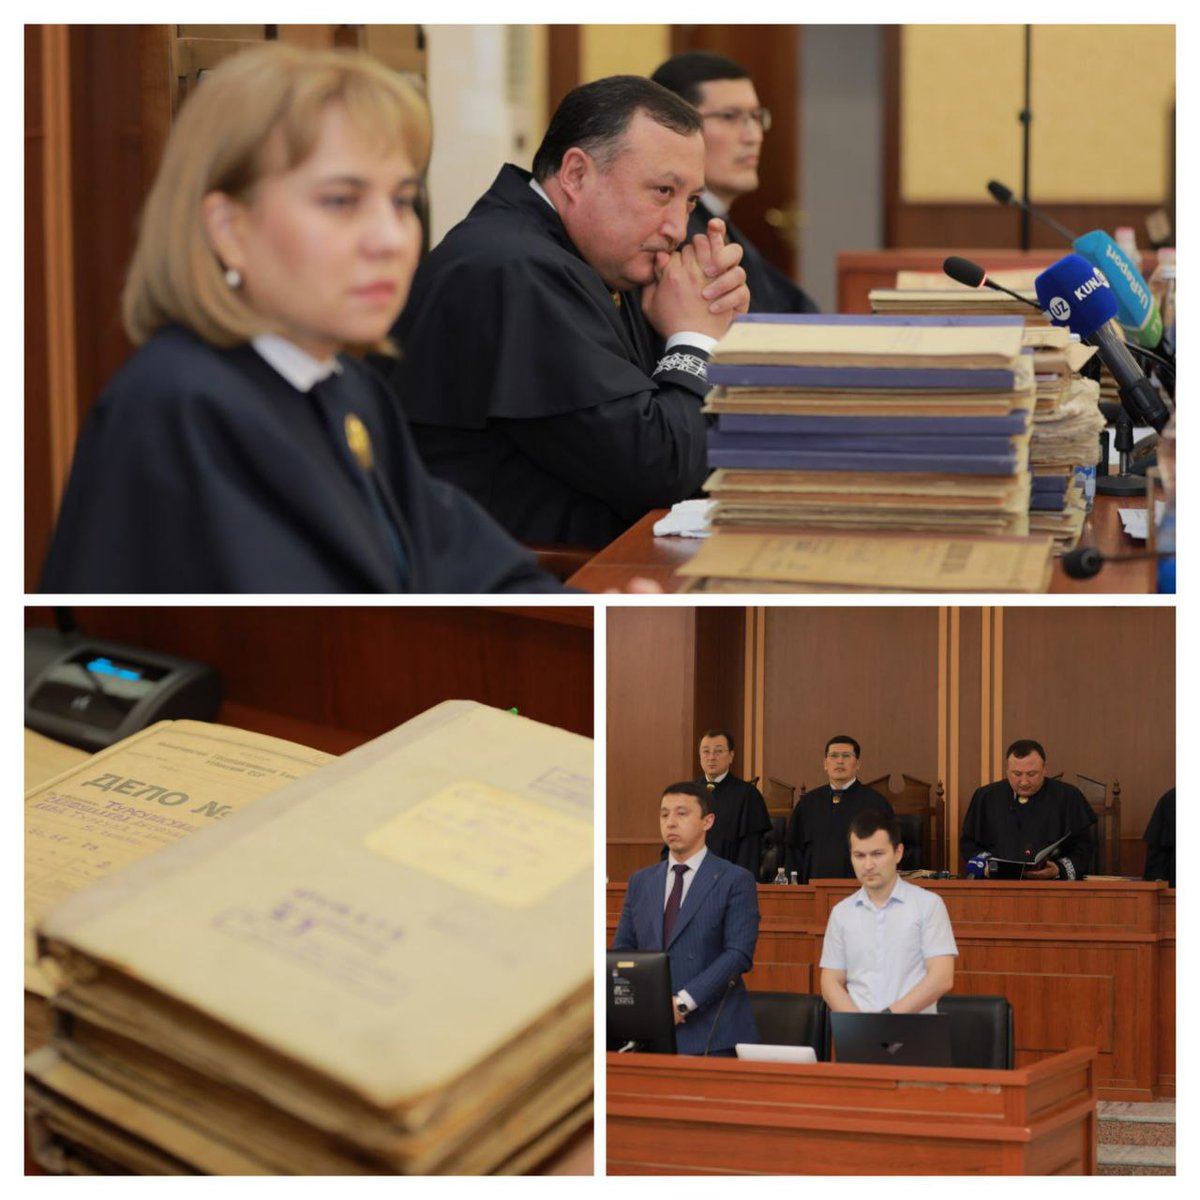 The Supreme Court of the Republic of Uzbekistan, at a session on May 6th, acquitted and rehabilitated 198 people who were repressed by the Communists in the 1920s and 1930s. The victims were accused by the OGPU, and later by the NKVD Troikas, of counter-revolutionary and